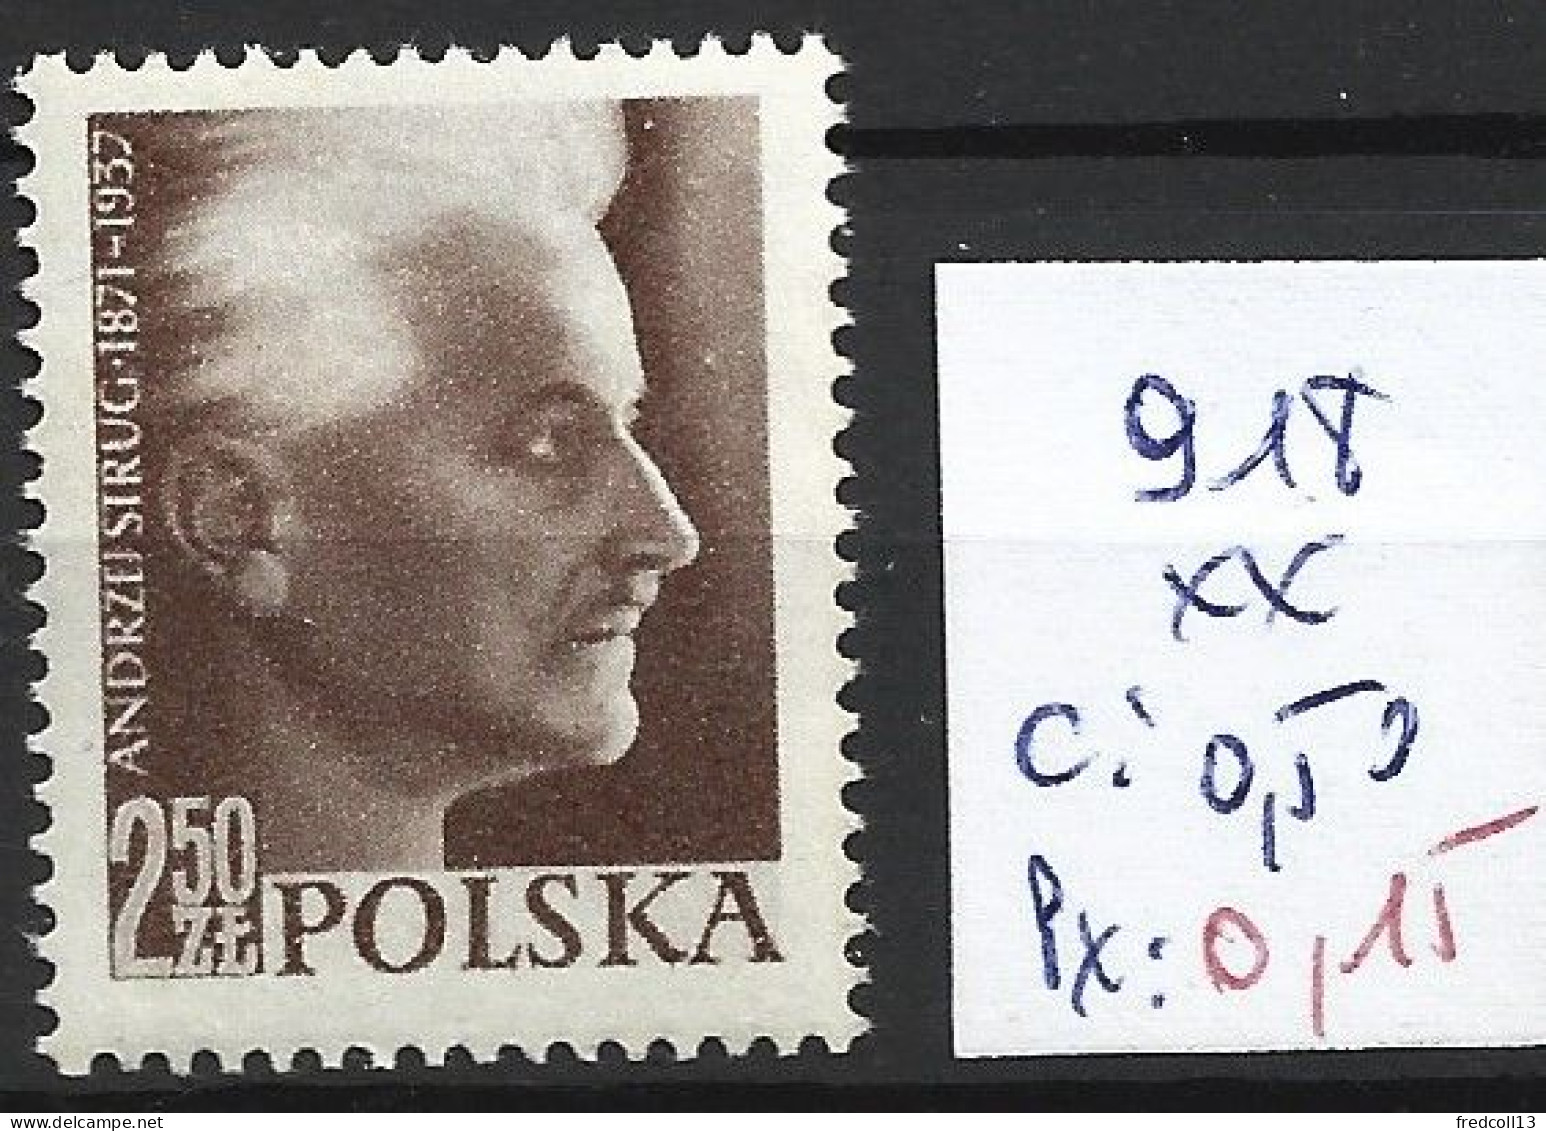 POLOGNE 918 ** Côte 0.50 € - Unused Stamps